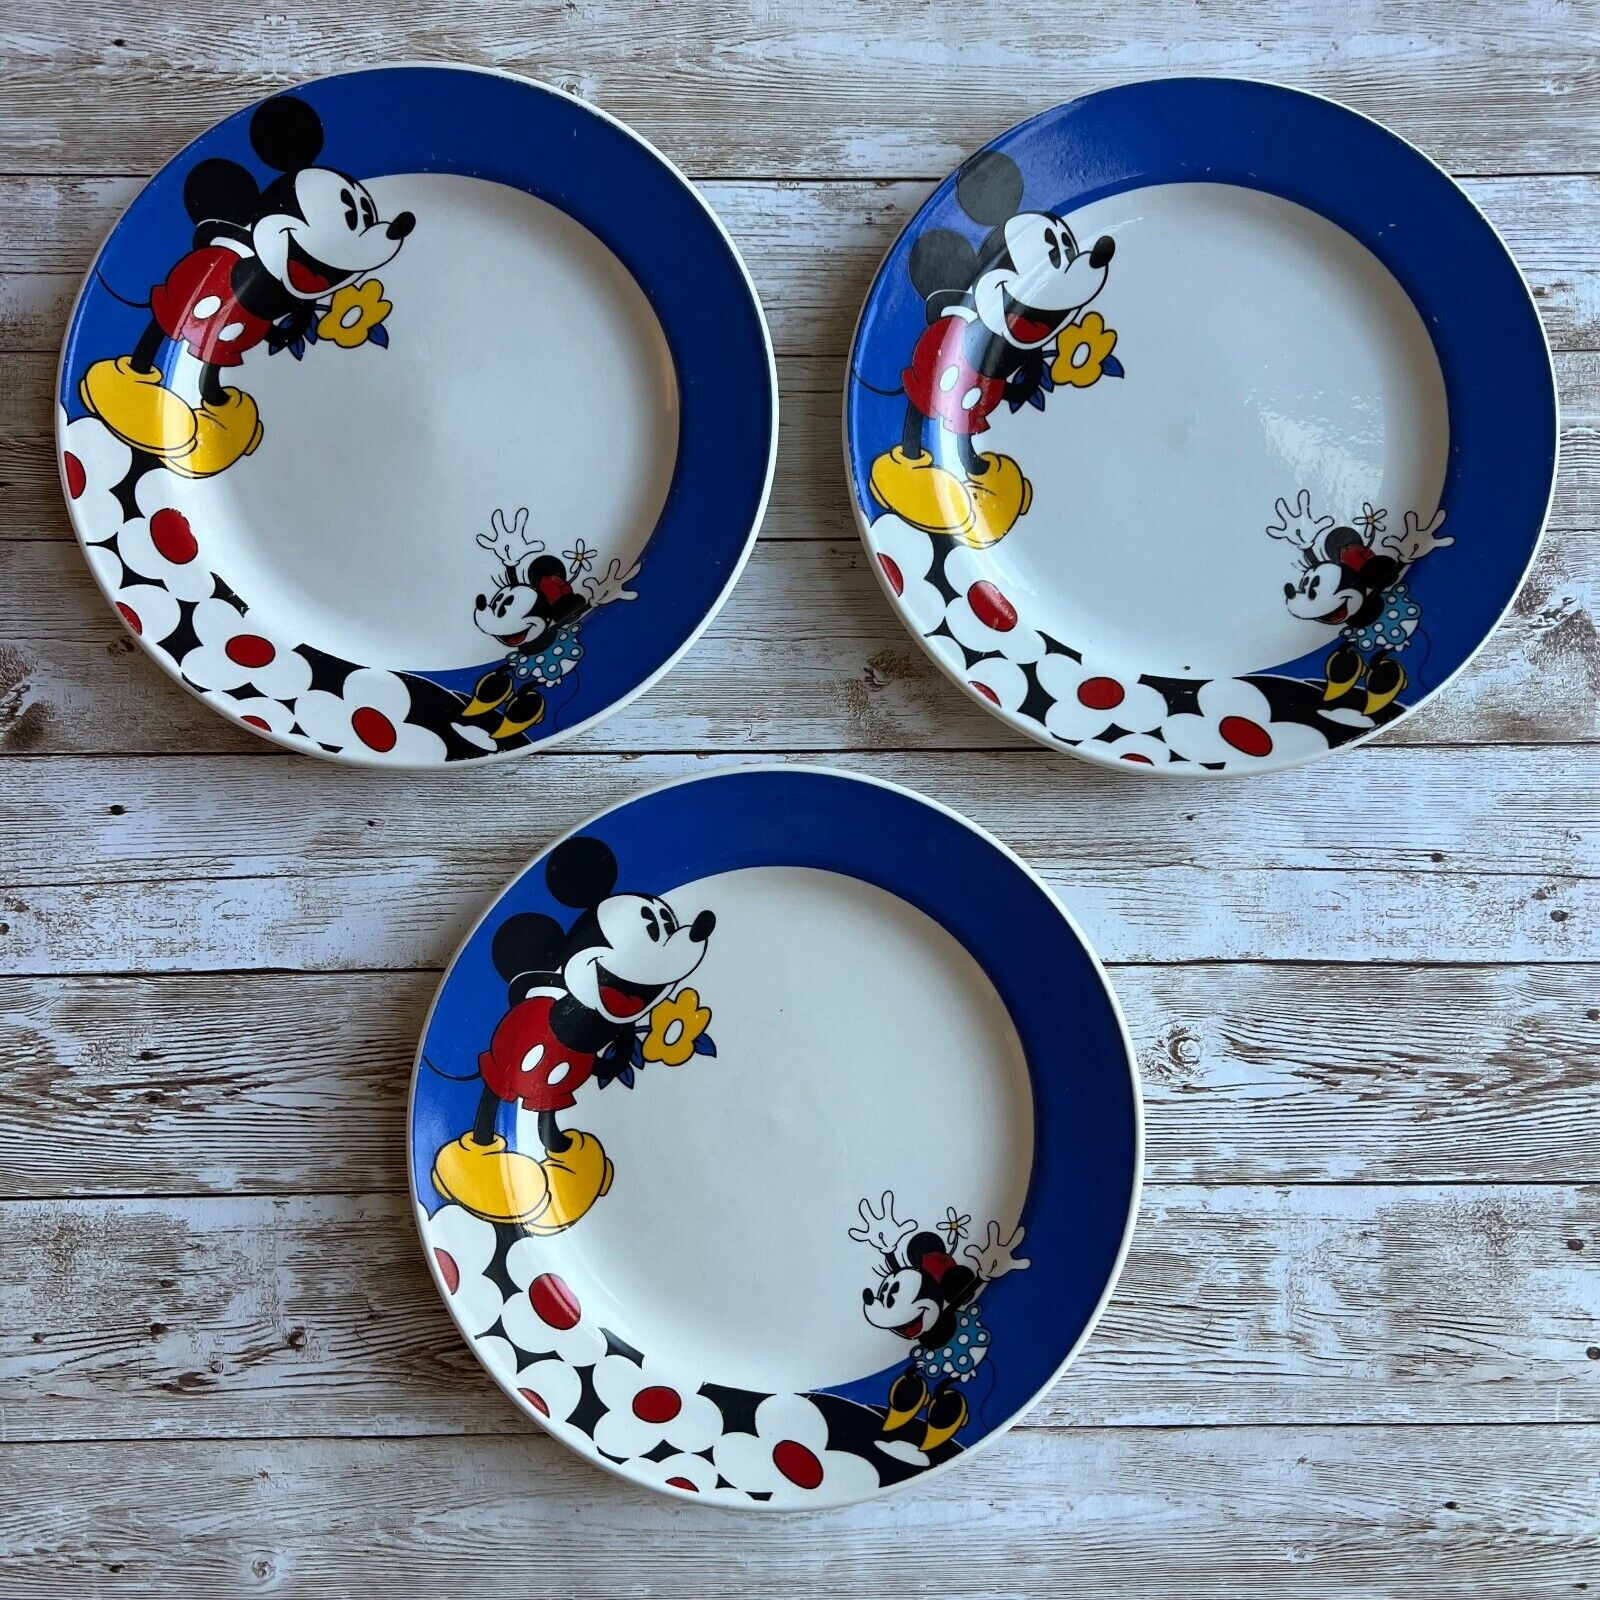 Vintage Lot Of 3 Disney By Gabbay 7.5 Inch Mickey & Minnie Mouse Dinnerware Set